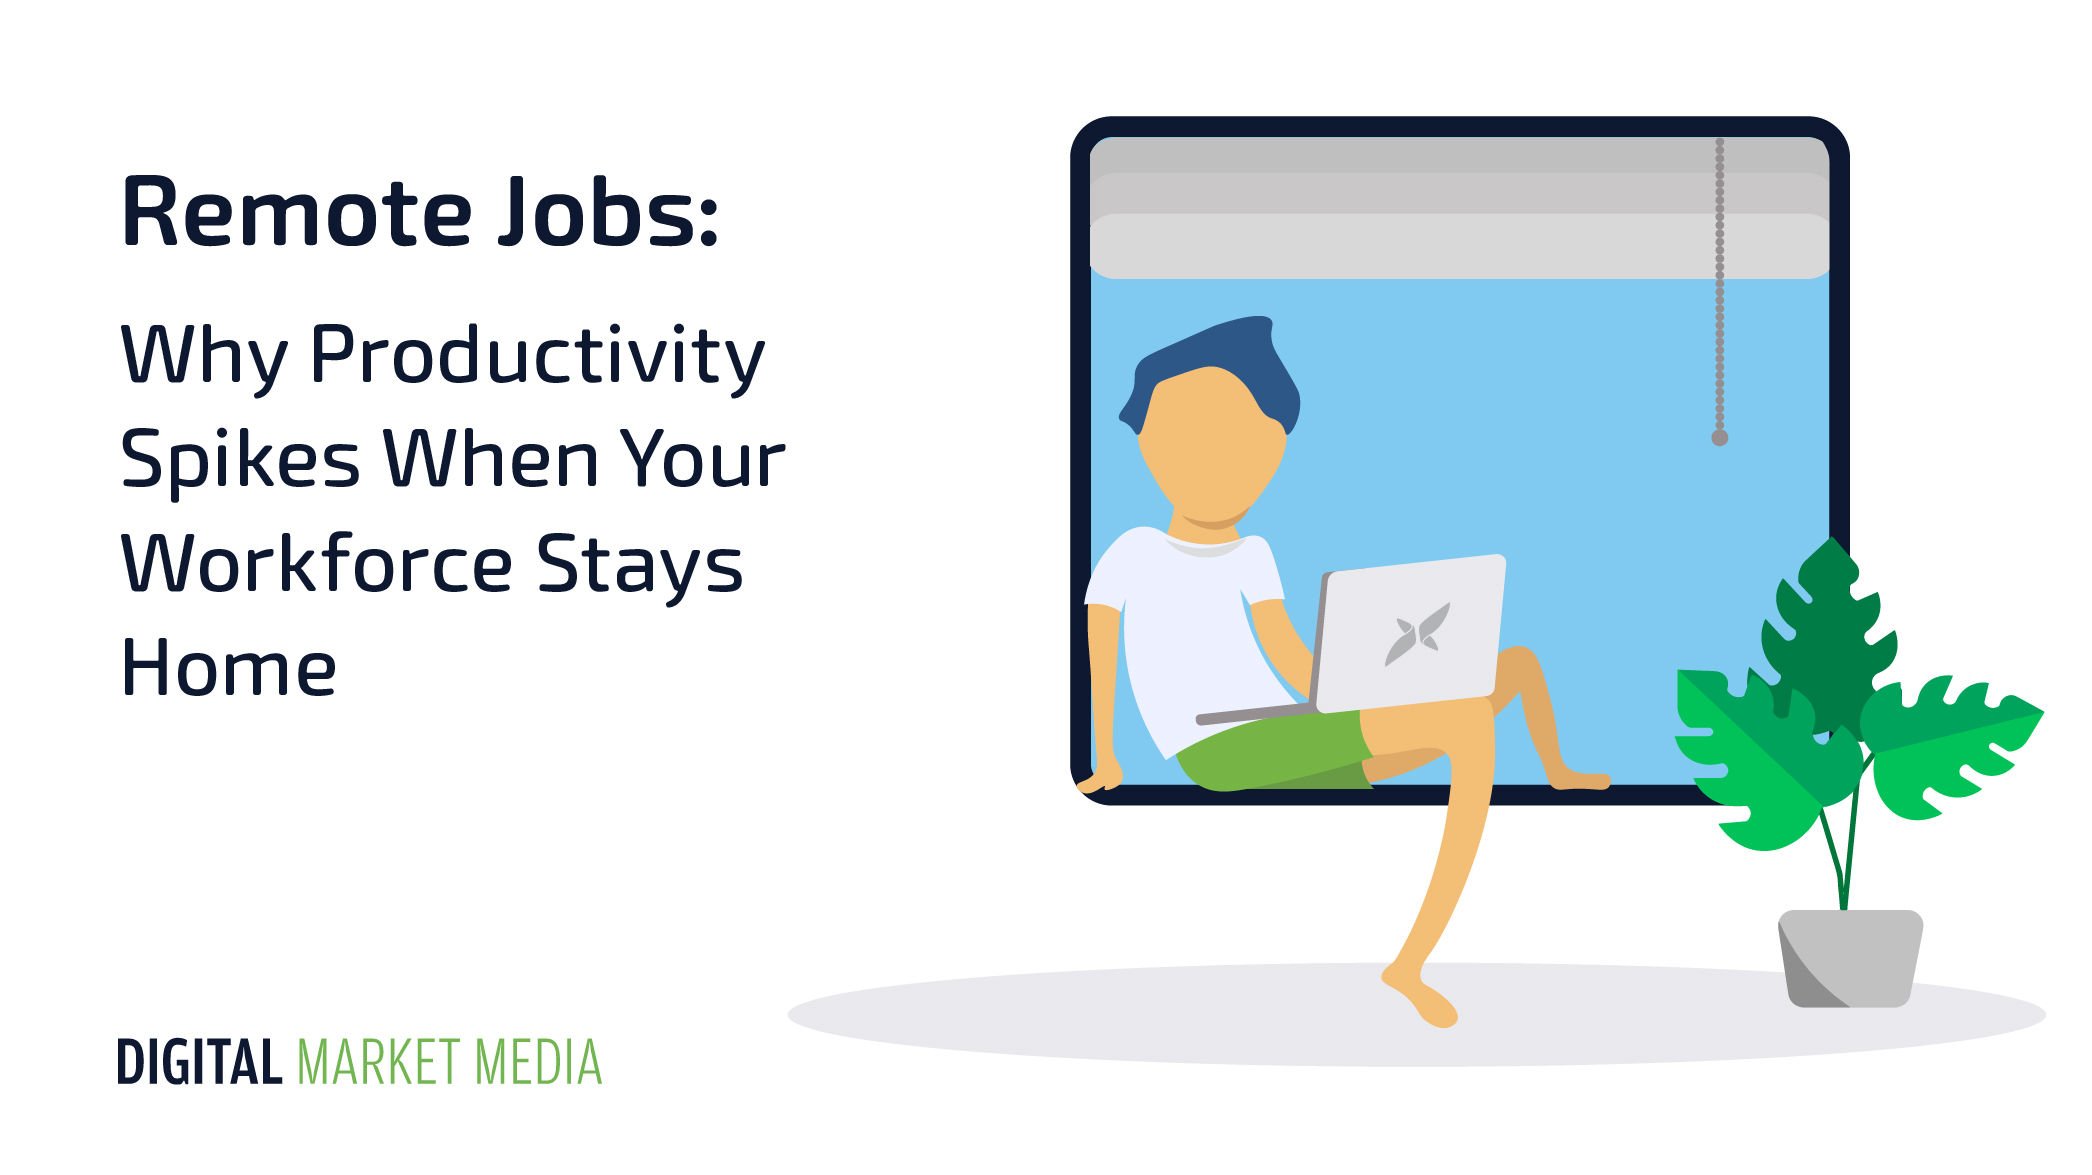 Remote Jobs: Why Productivity Spikes When Your Workforce Stays Home